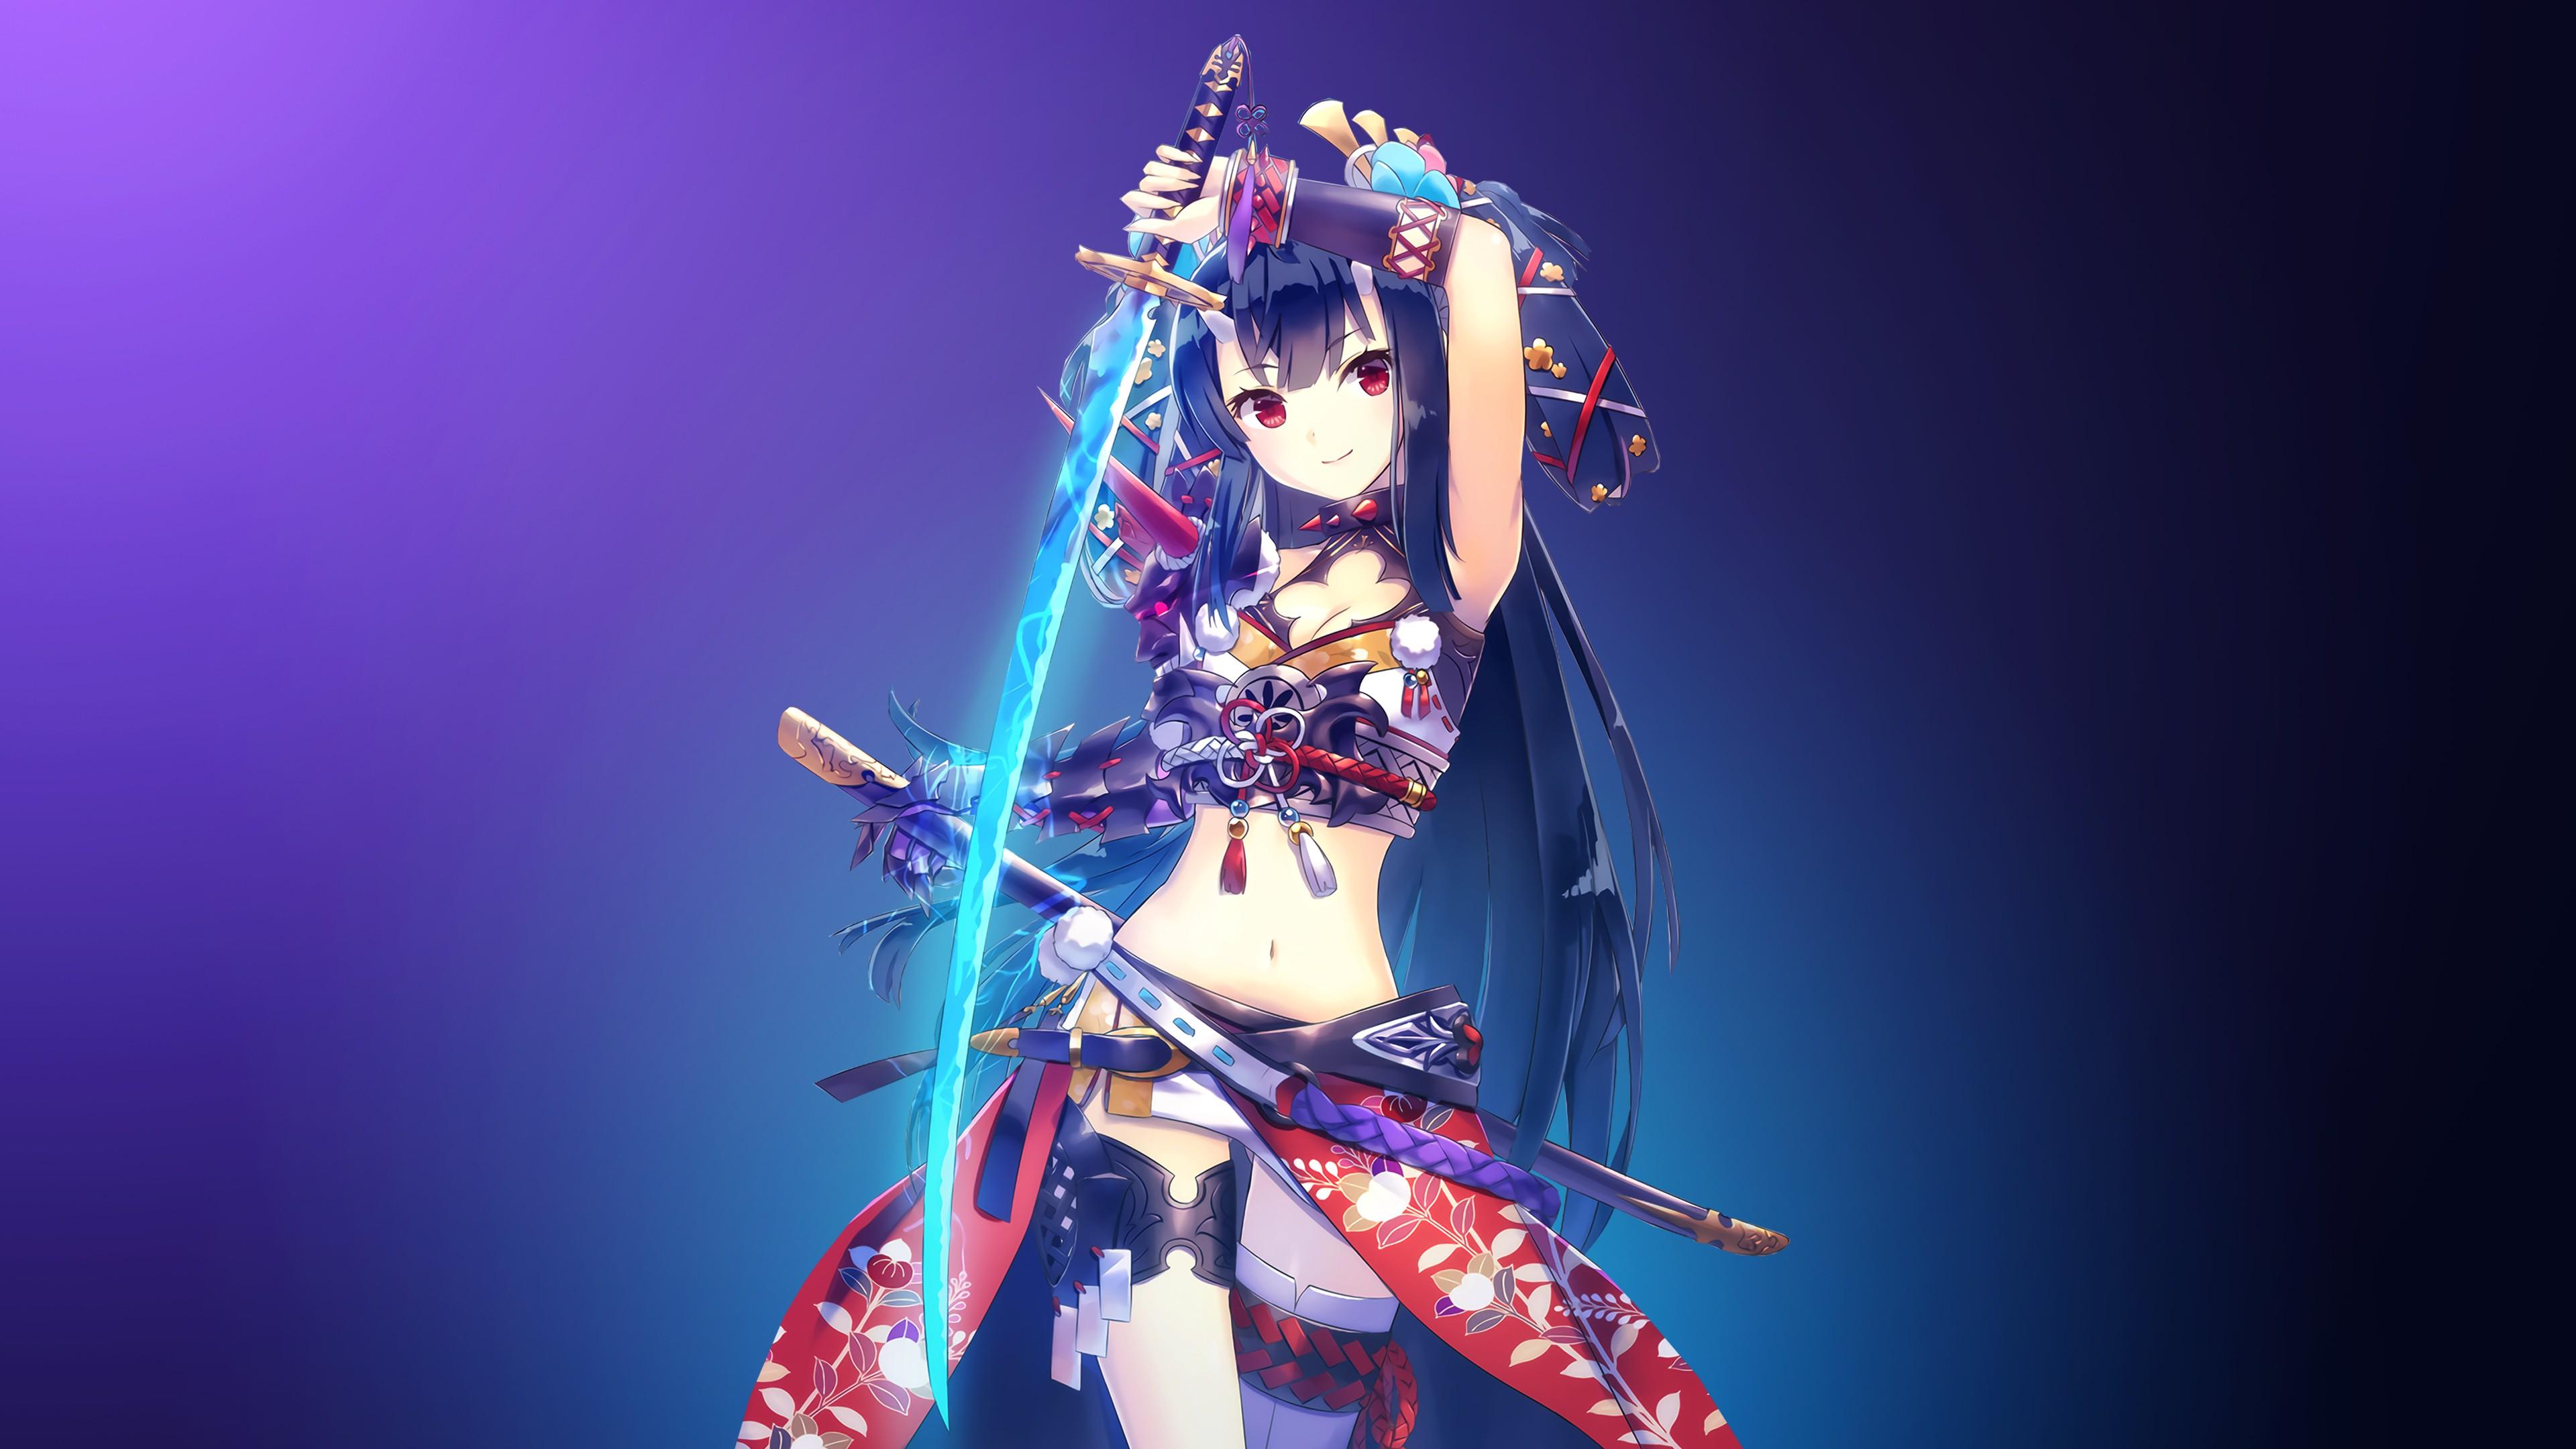 Anime girl with swords wallpapers